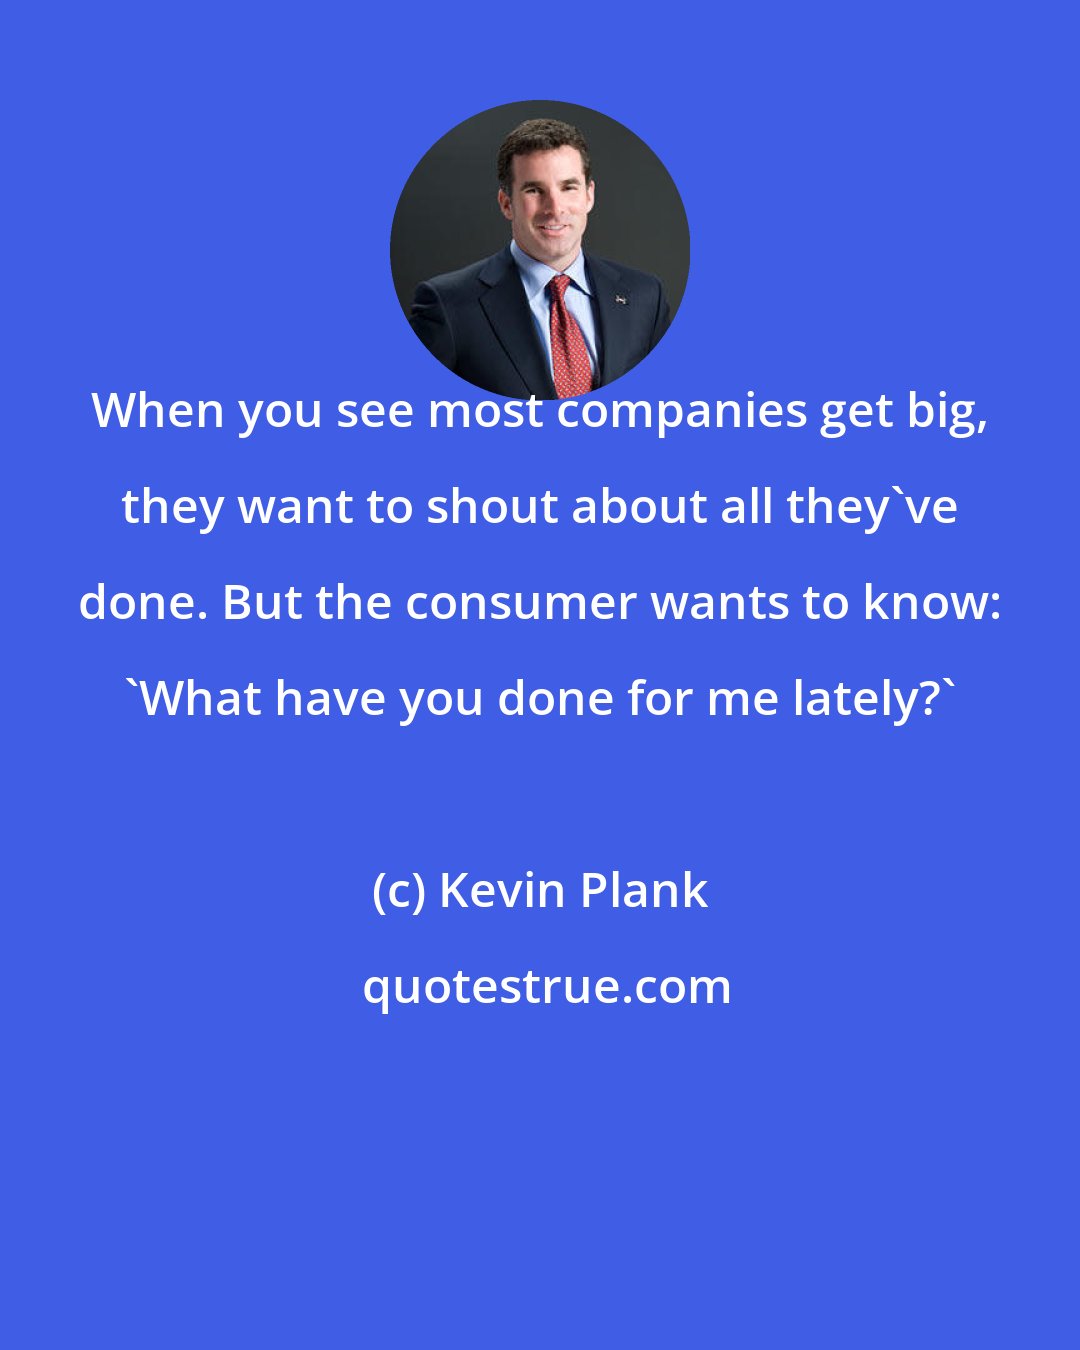 Kevin Plank: When you see most companies get big, they want to shout about all they've done. But the consumer wants to know: 'What have you done for me lately?'